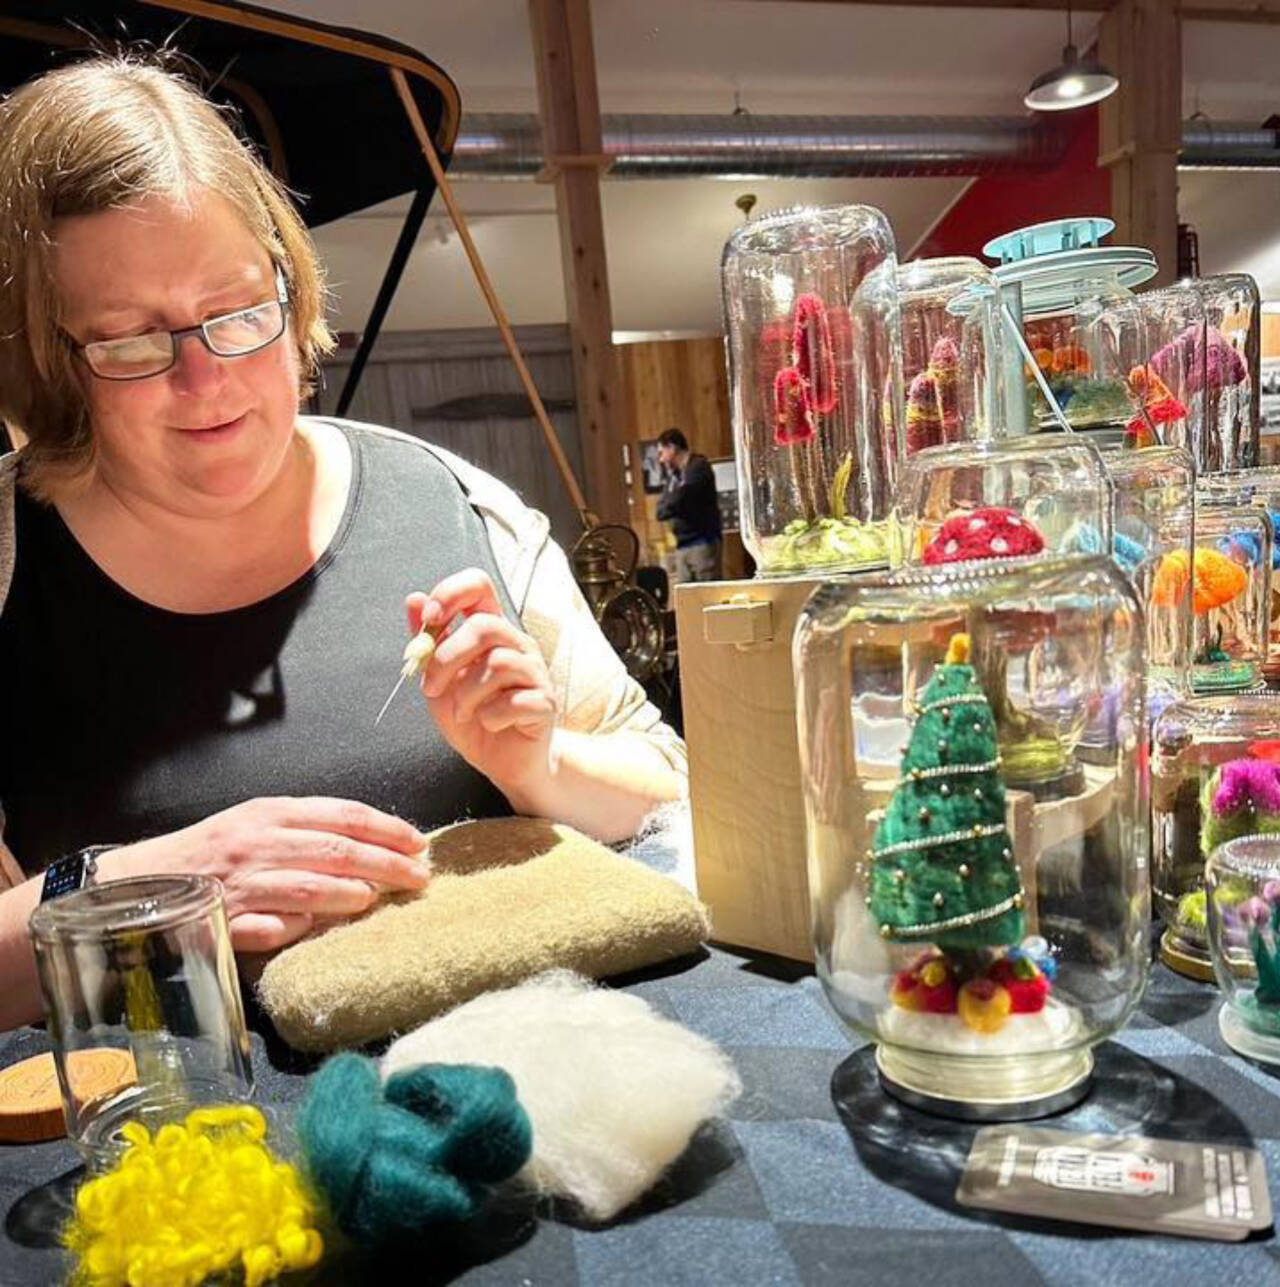 Jennifer Harris, demonstrating needle felting, is one of several artists participating in the Fiber Arts Festival “Interlaced Lore — Adventure, Fellowship, & Perseverance” exhibition’s final day at Sequim Museum & Arts on Saturday. (Submitted photo)